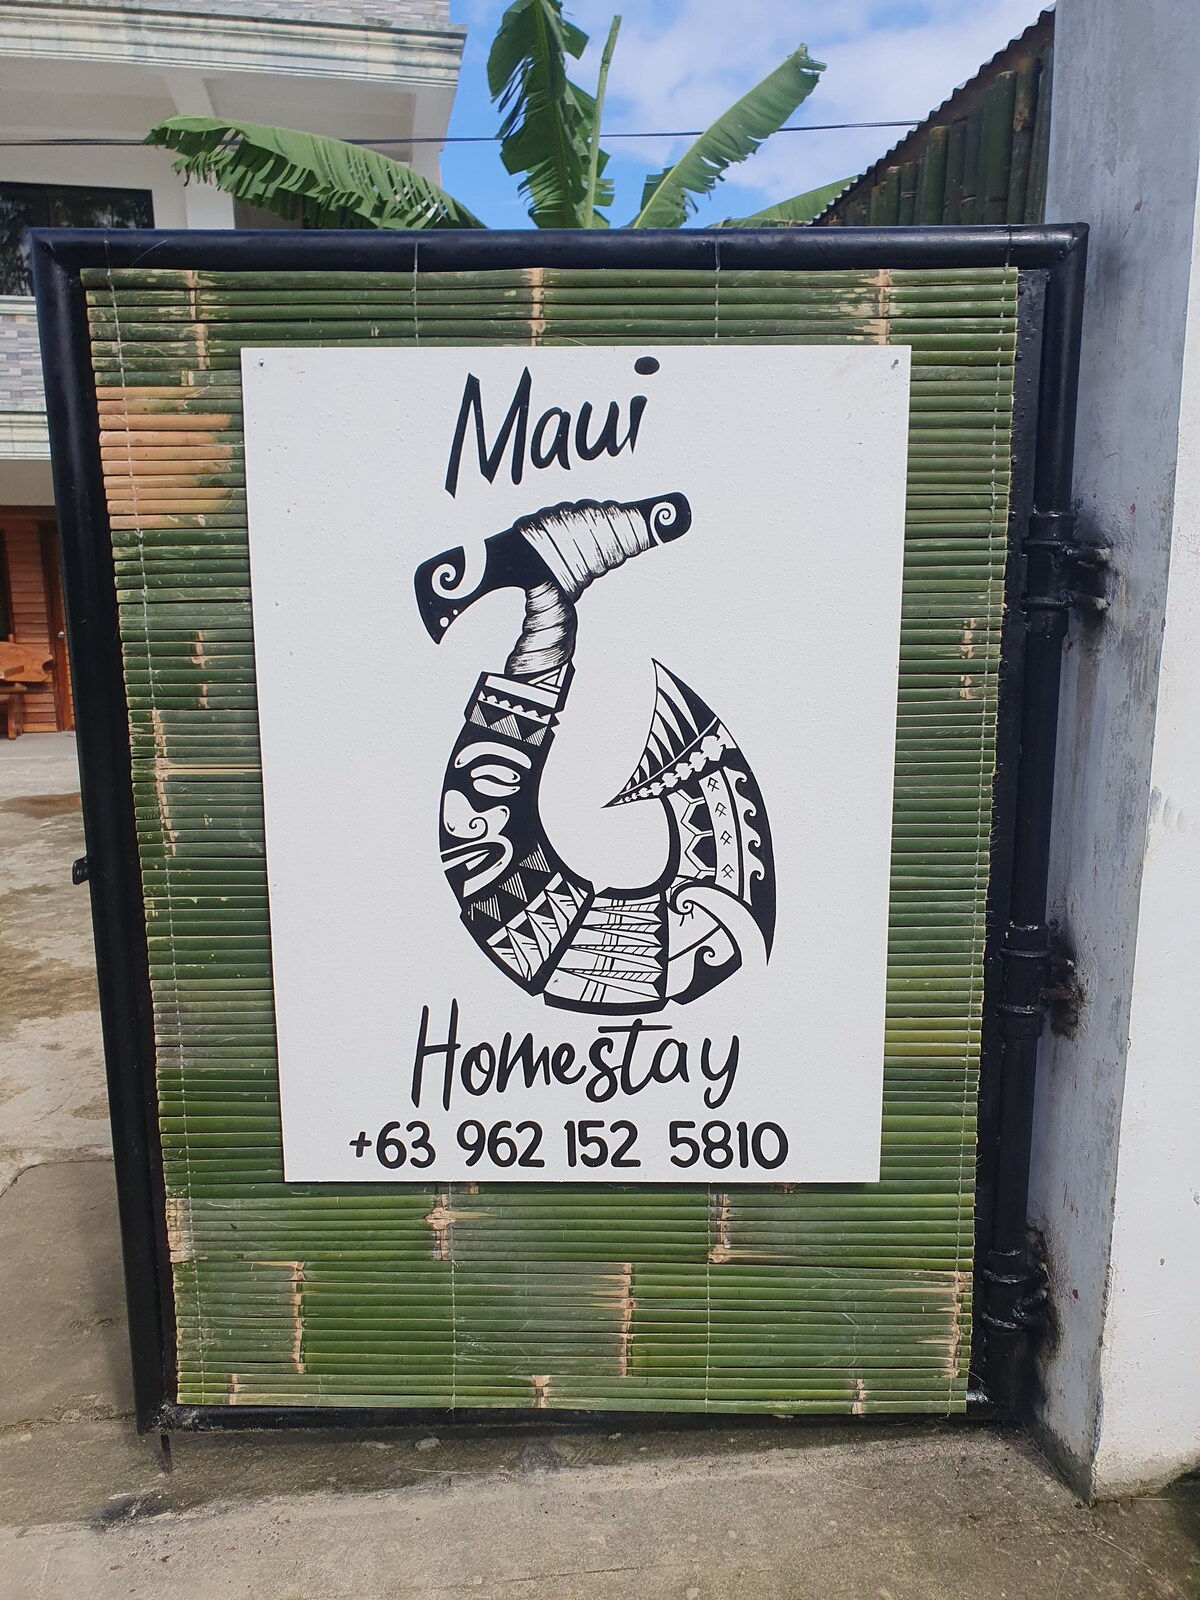 Maui Homestay "the entire place"